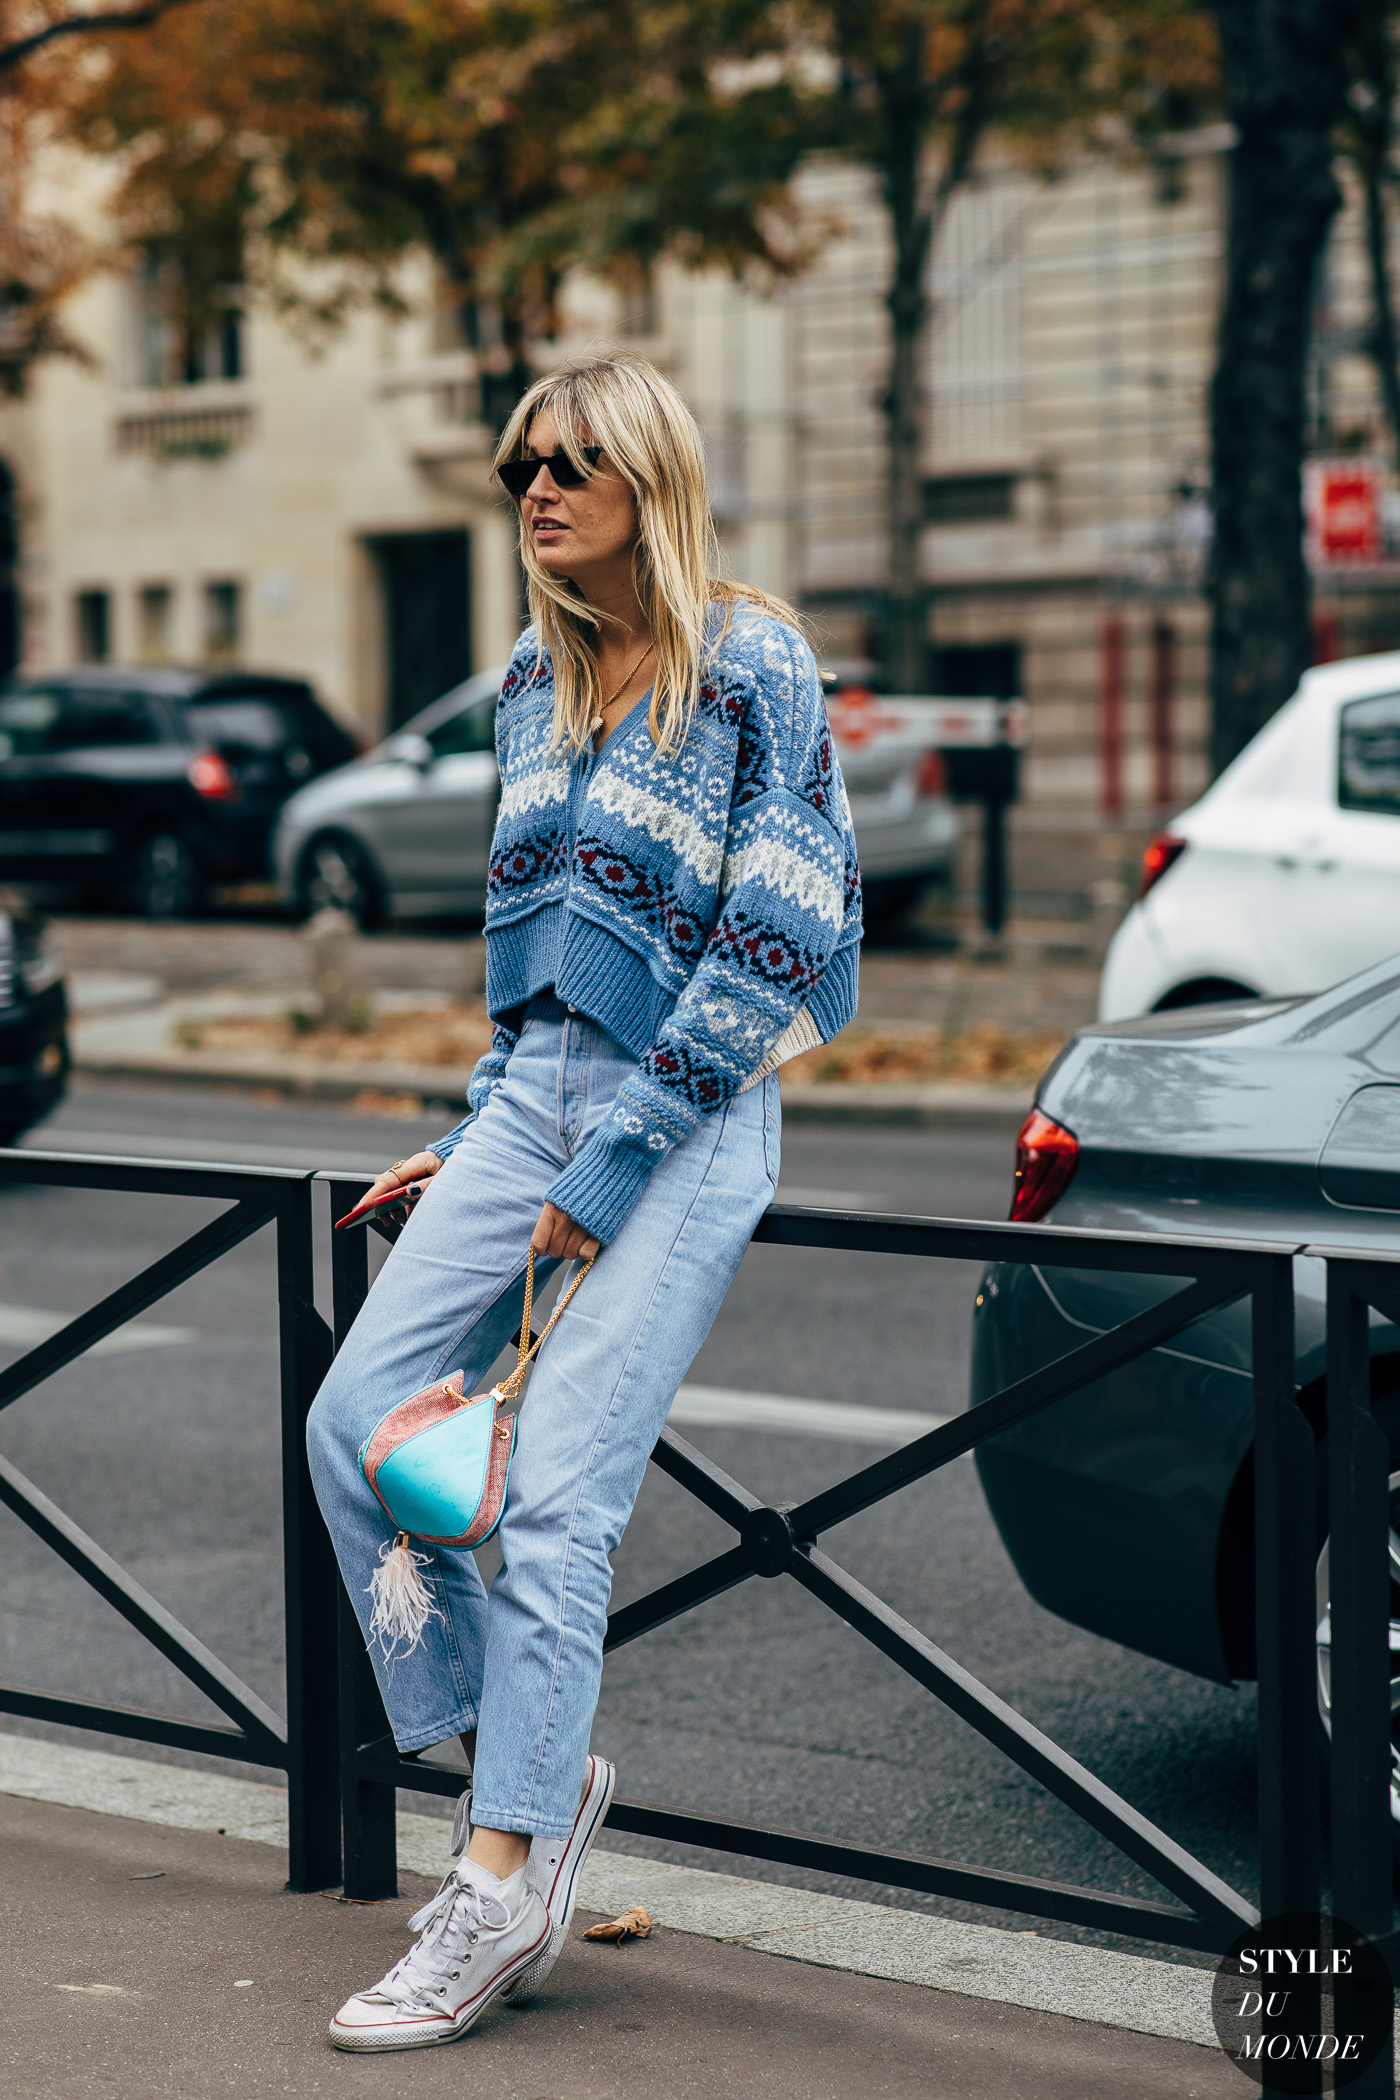 Camille Charriere by STYLEDUMONDE Street Style Fashion Photography_48A7323